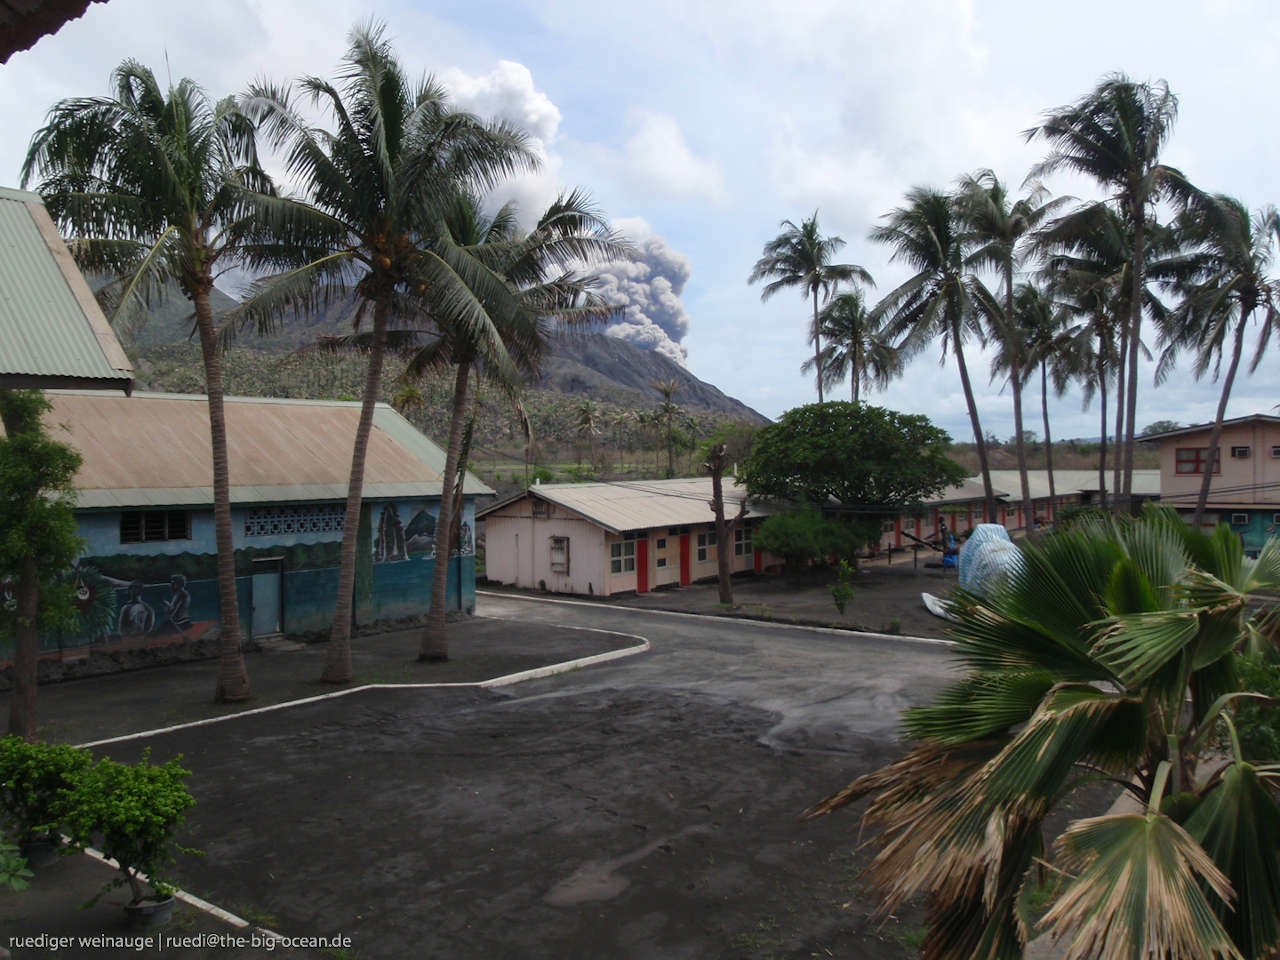 Village with erupting volcano in the distance